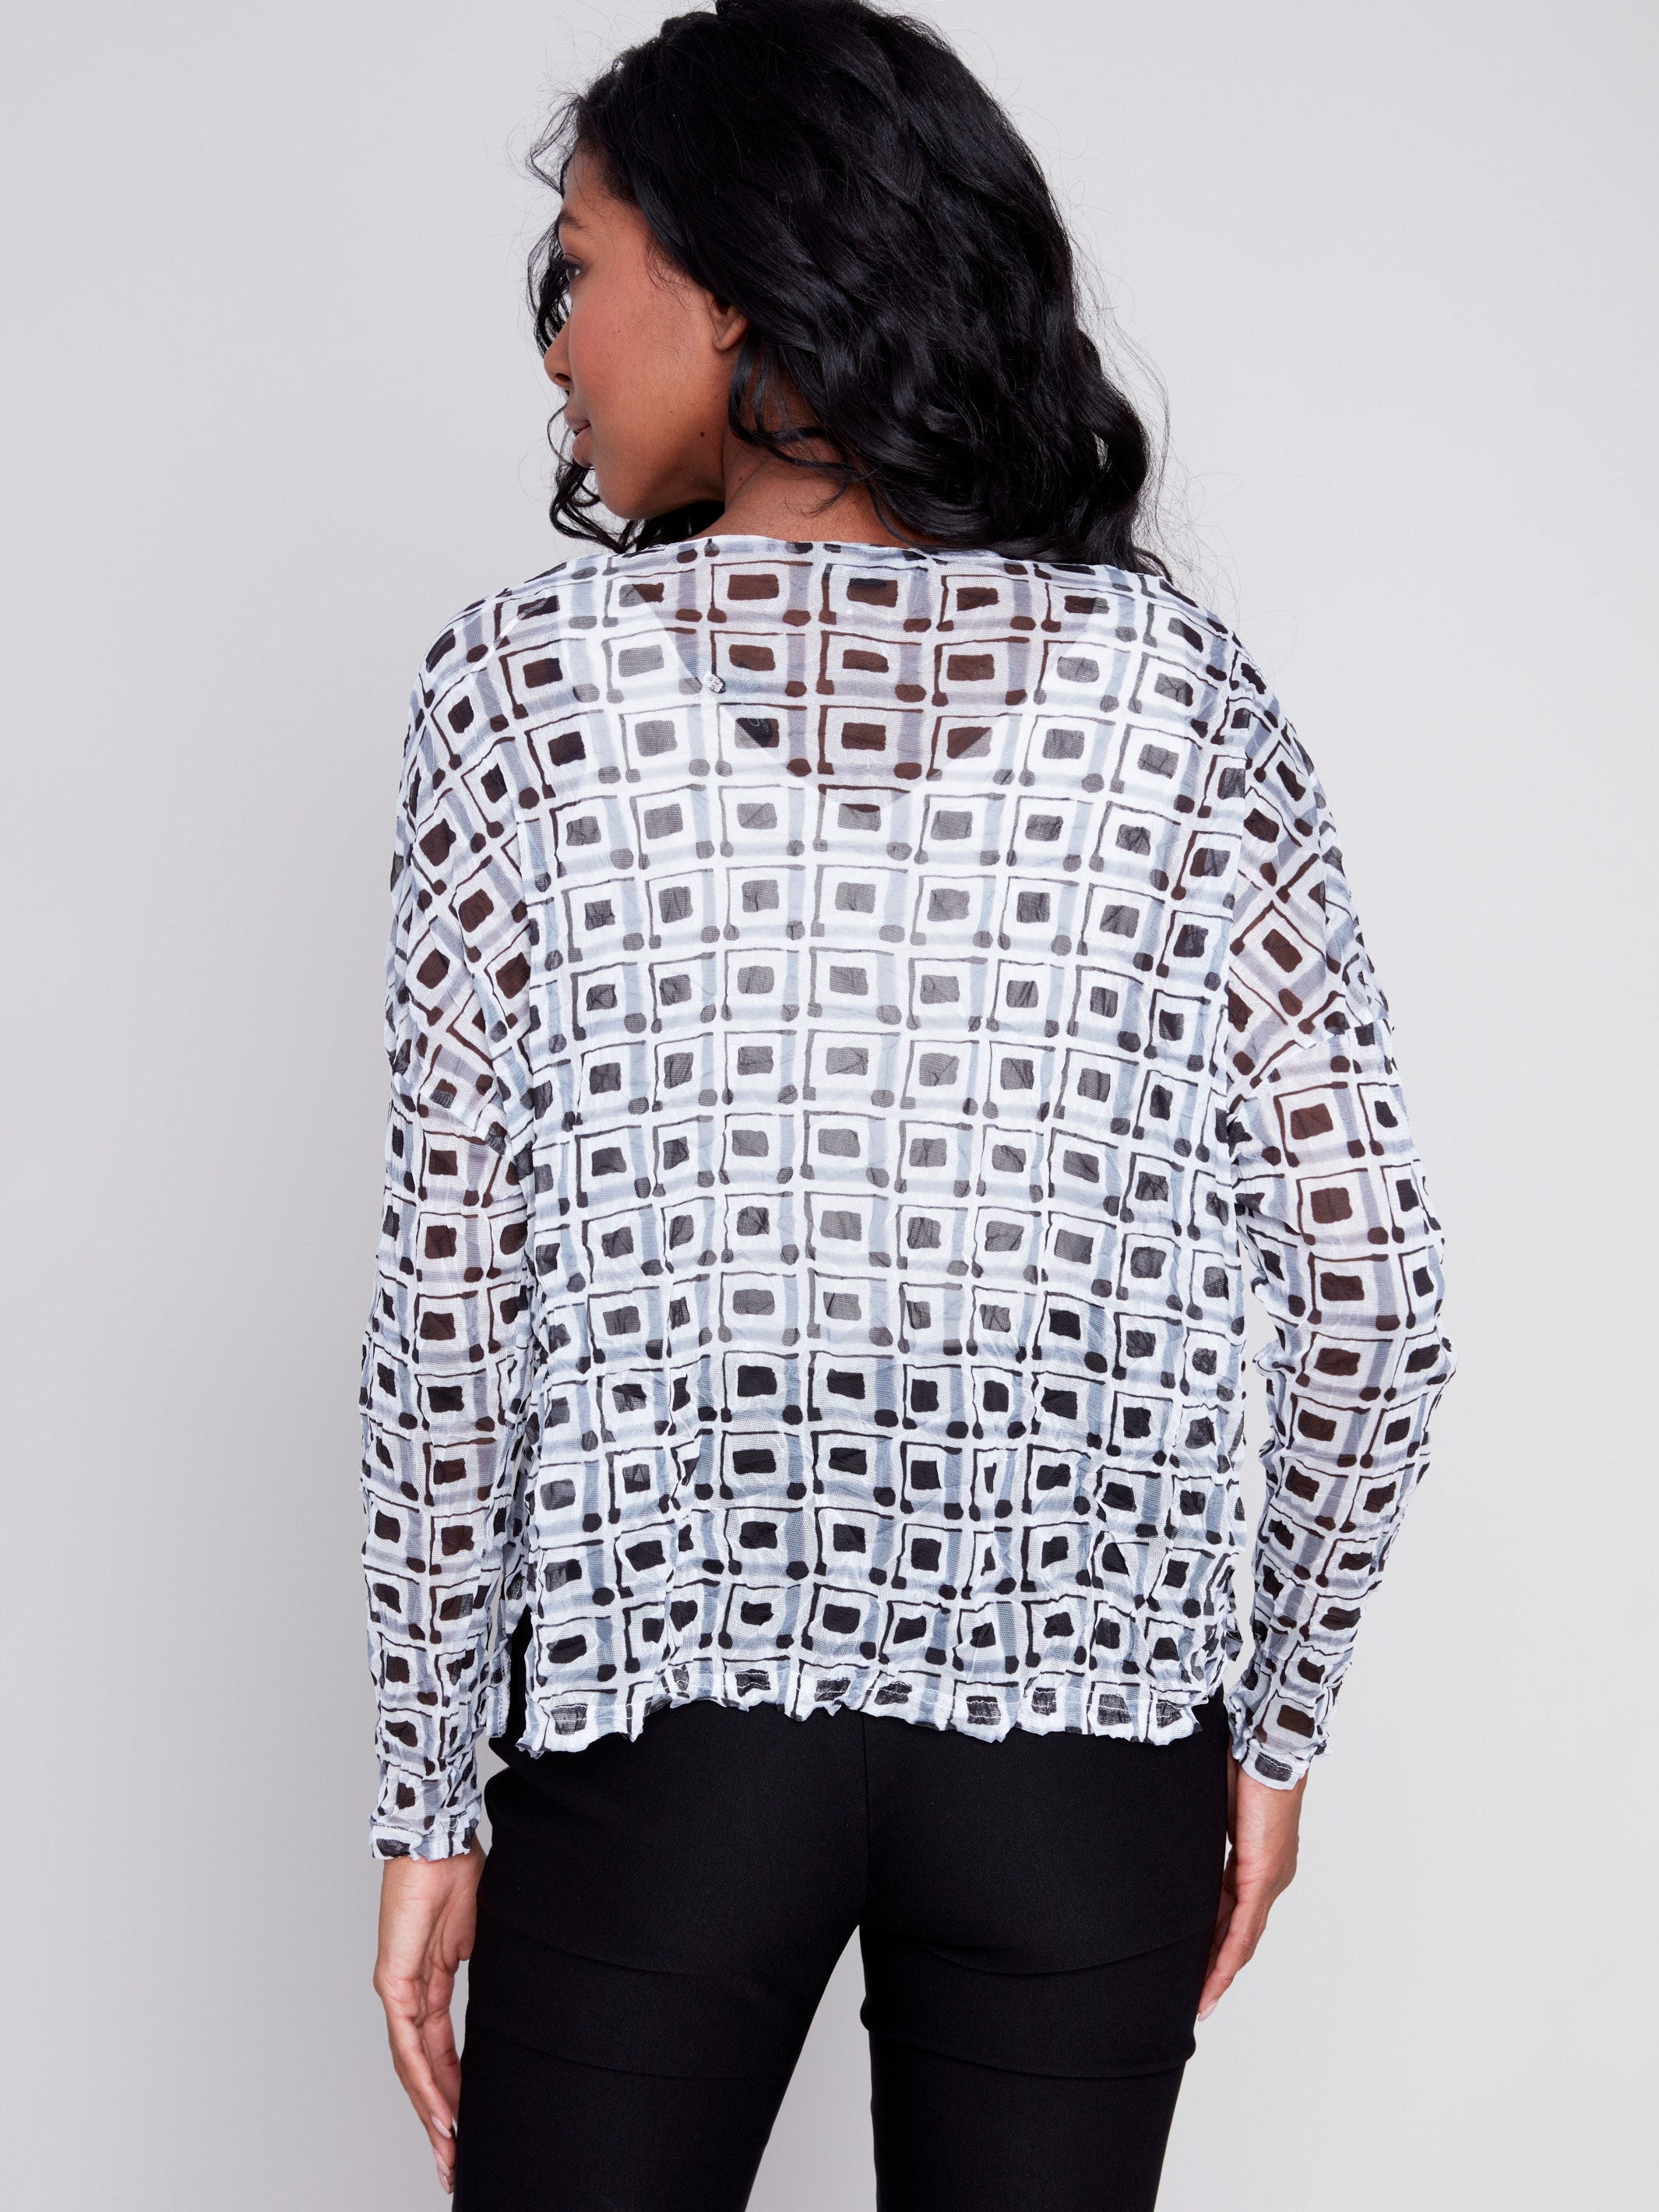 Printed Crinkle Mesh Top - Checker - Charlie B Collection Canada - Image 3